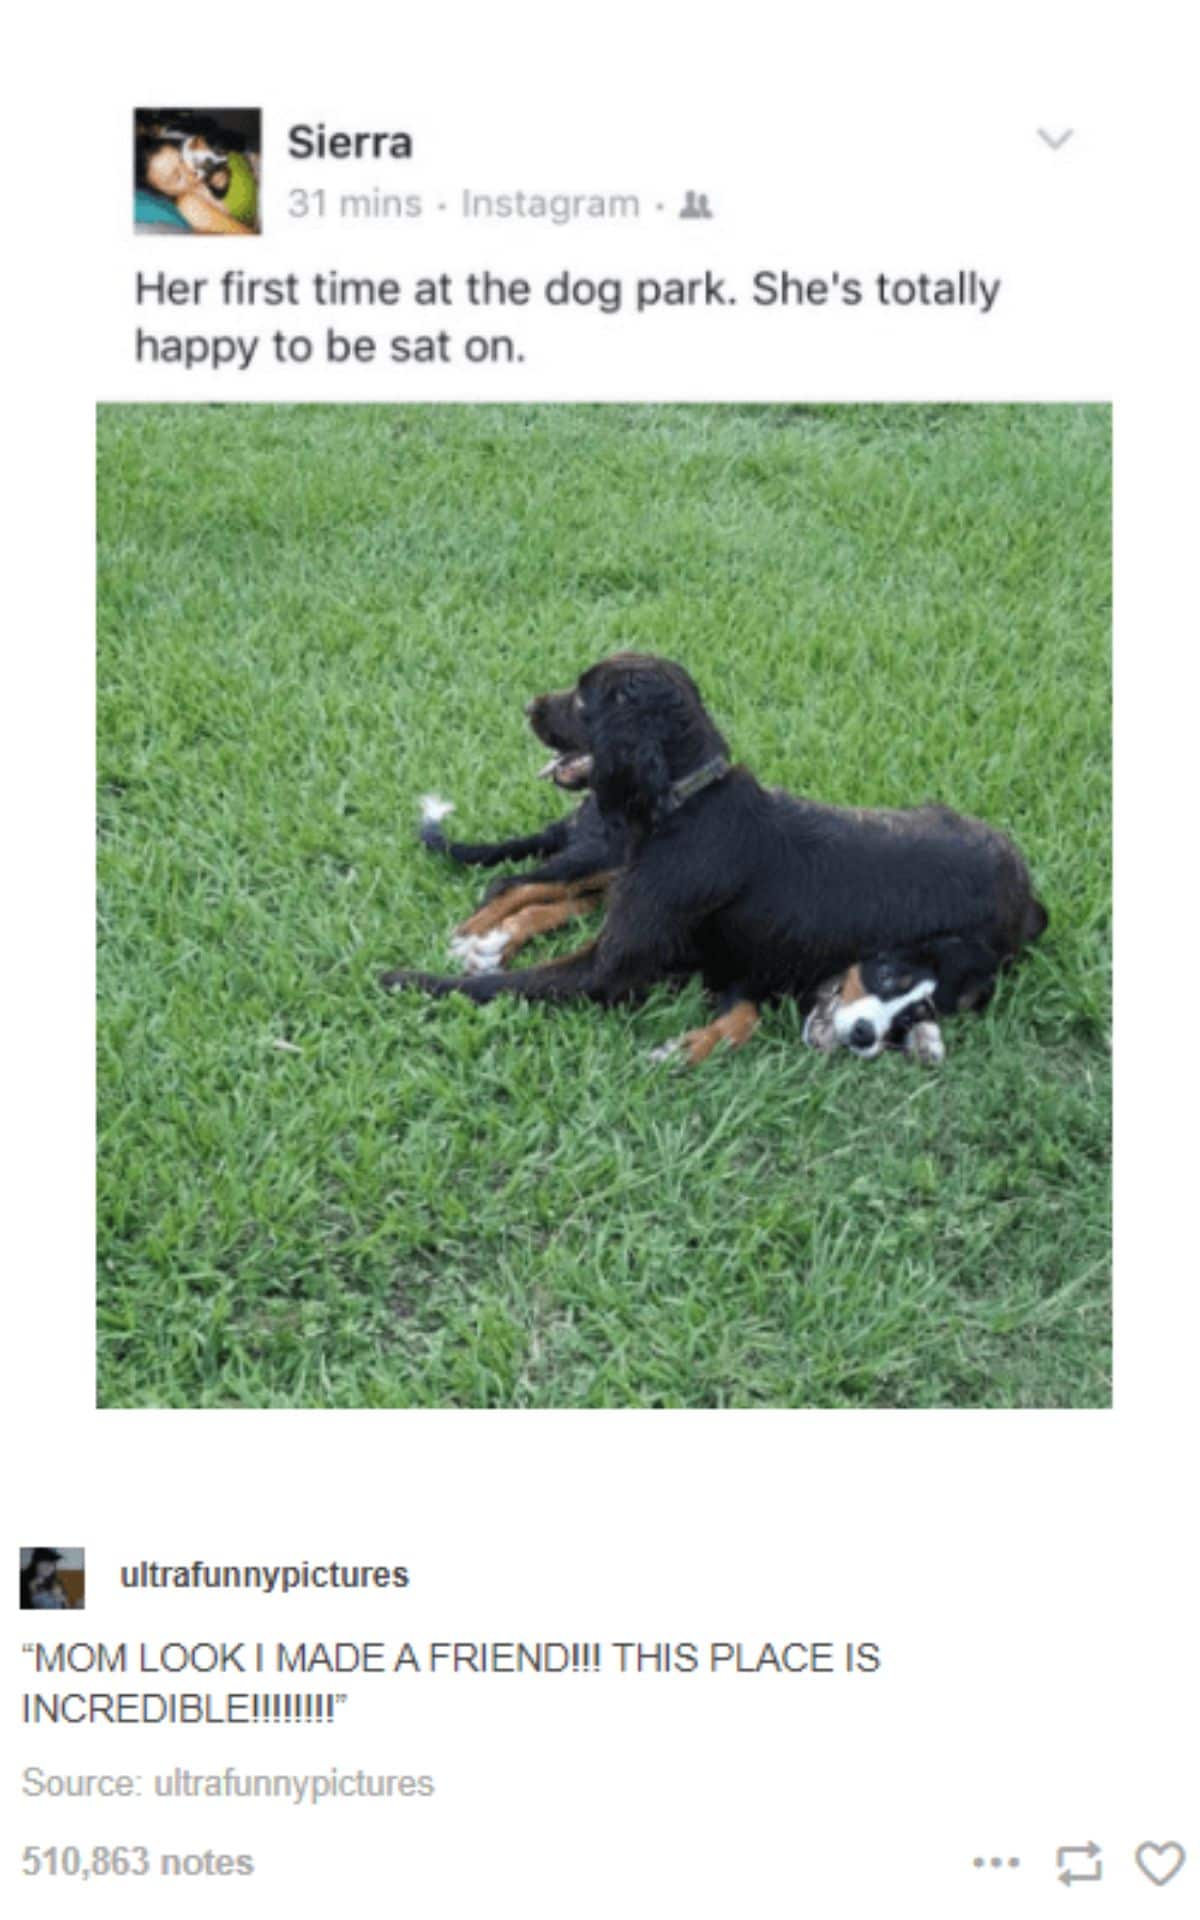 tumblr post of black dog sitting on happy black brown and white dog with caption saying she's at the dog park and happy to be sat on